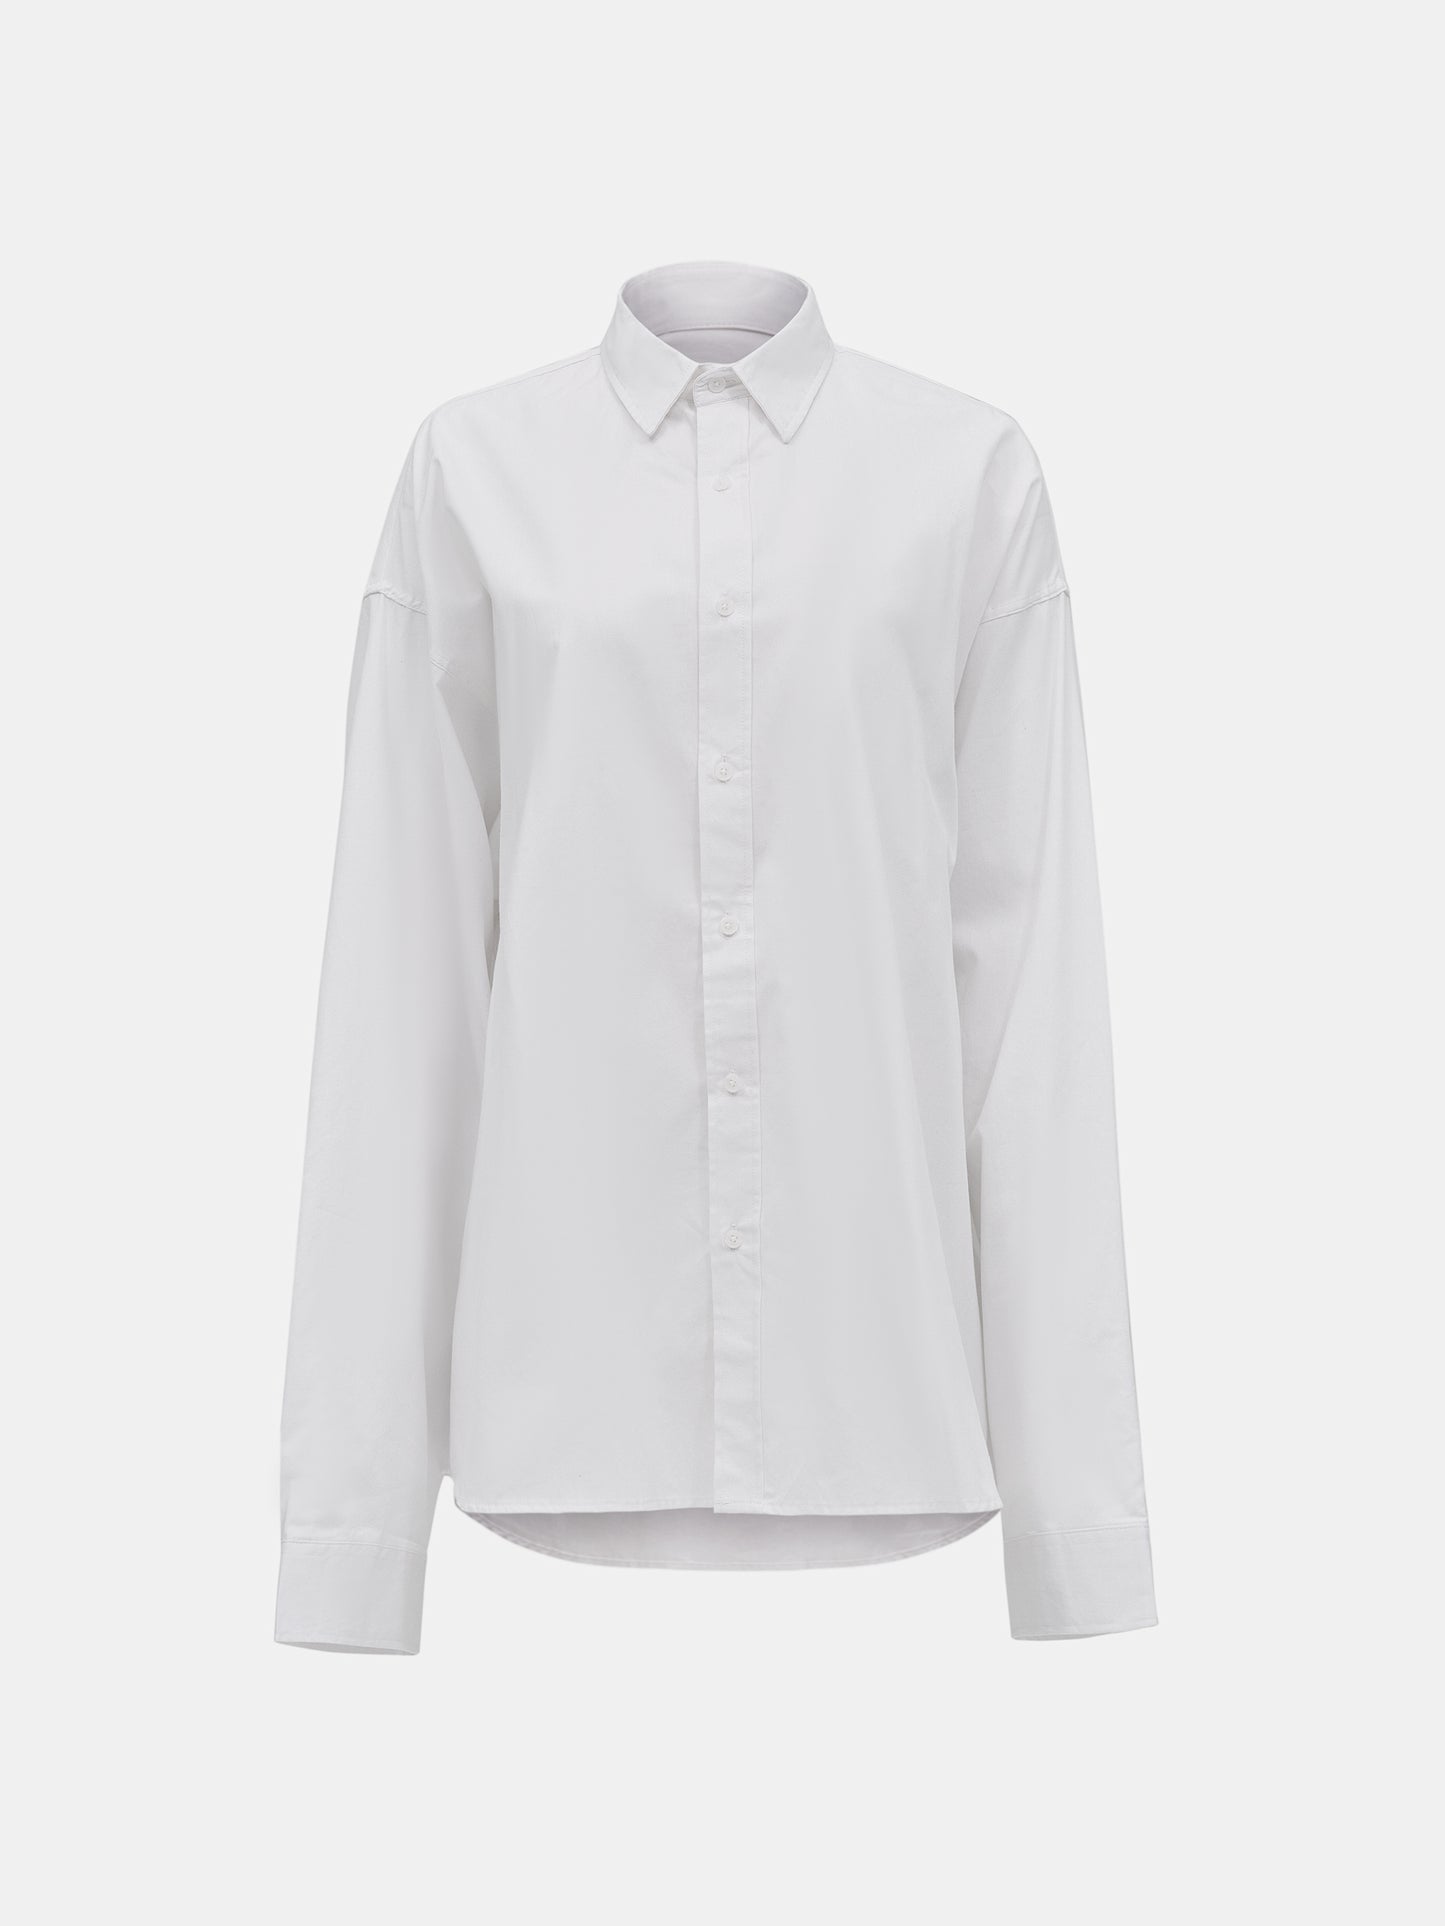 Over-Fit Cotton Shirt, White